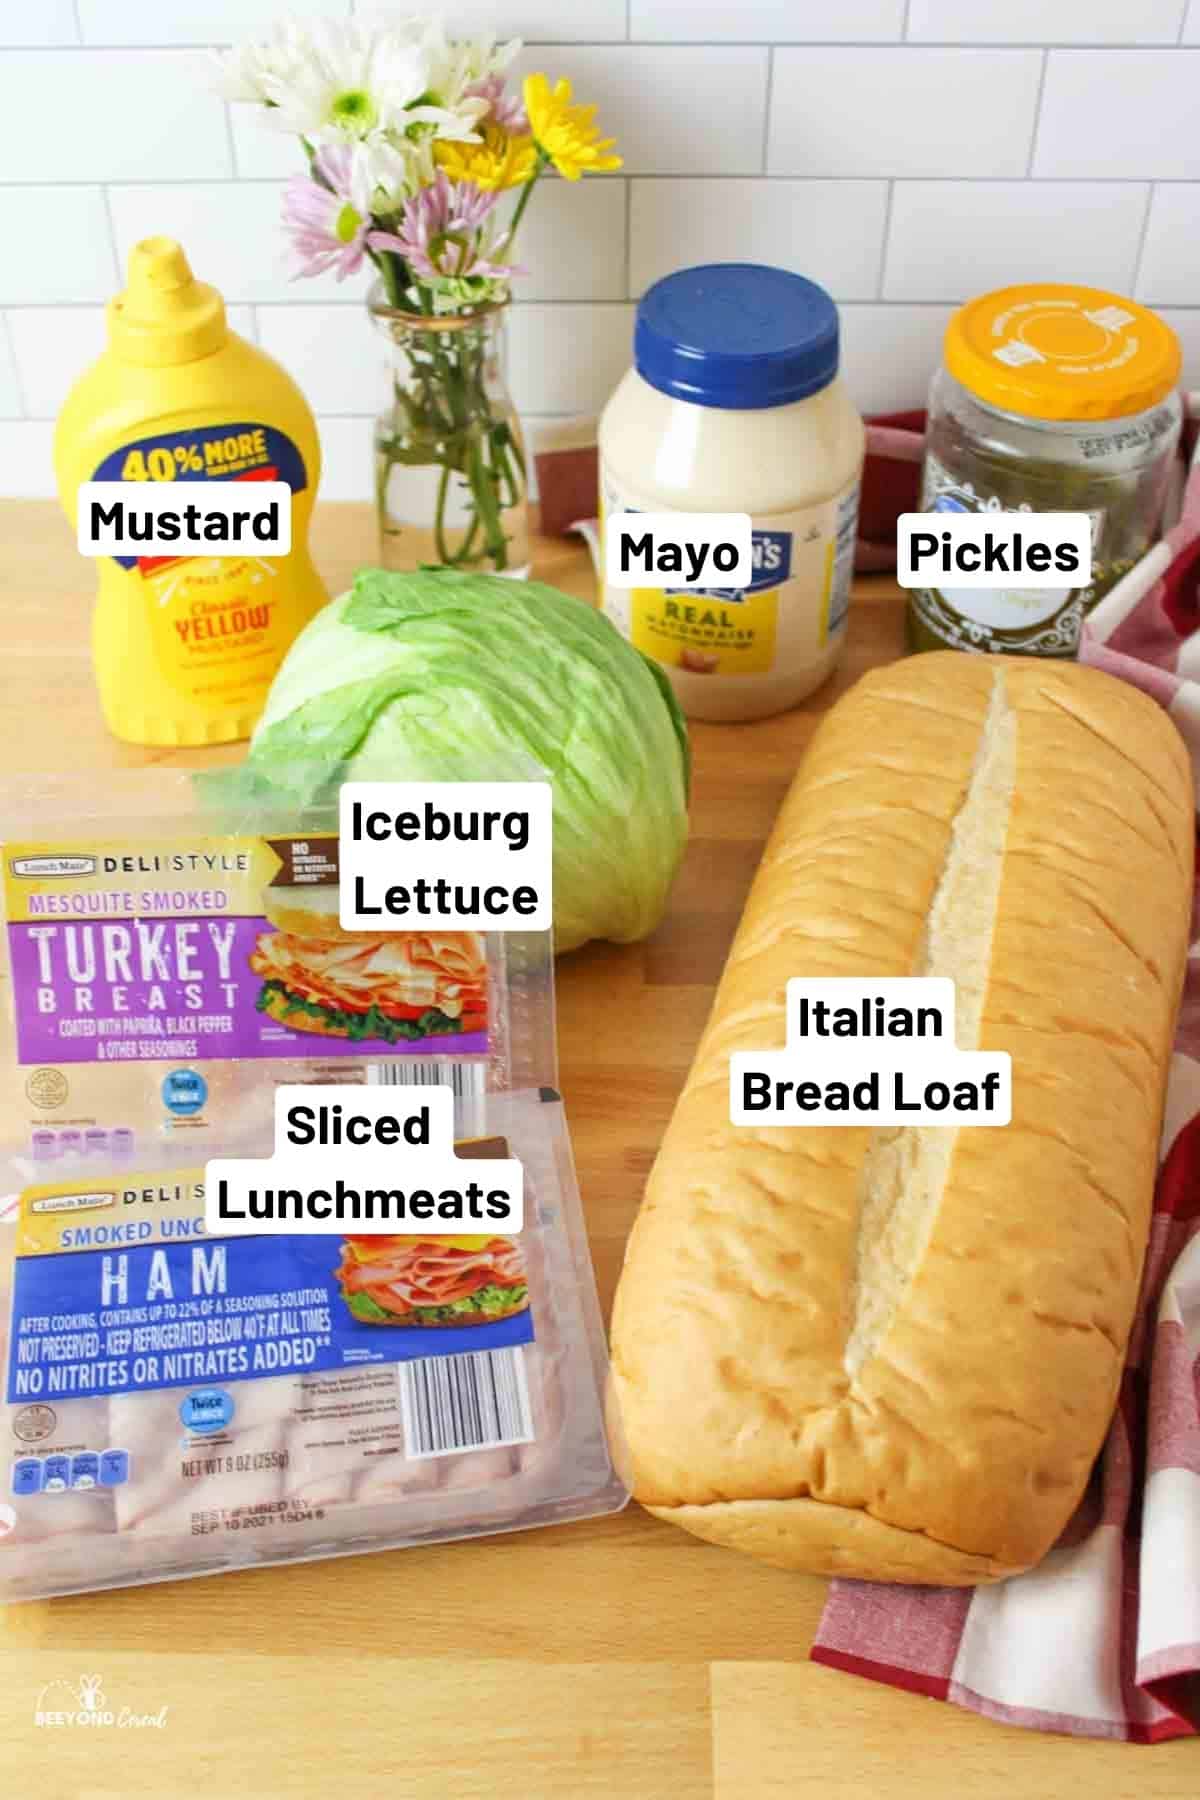 ingredients needed to make a giant sub sandwich at home